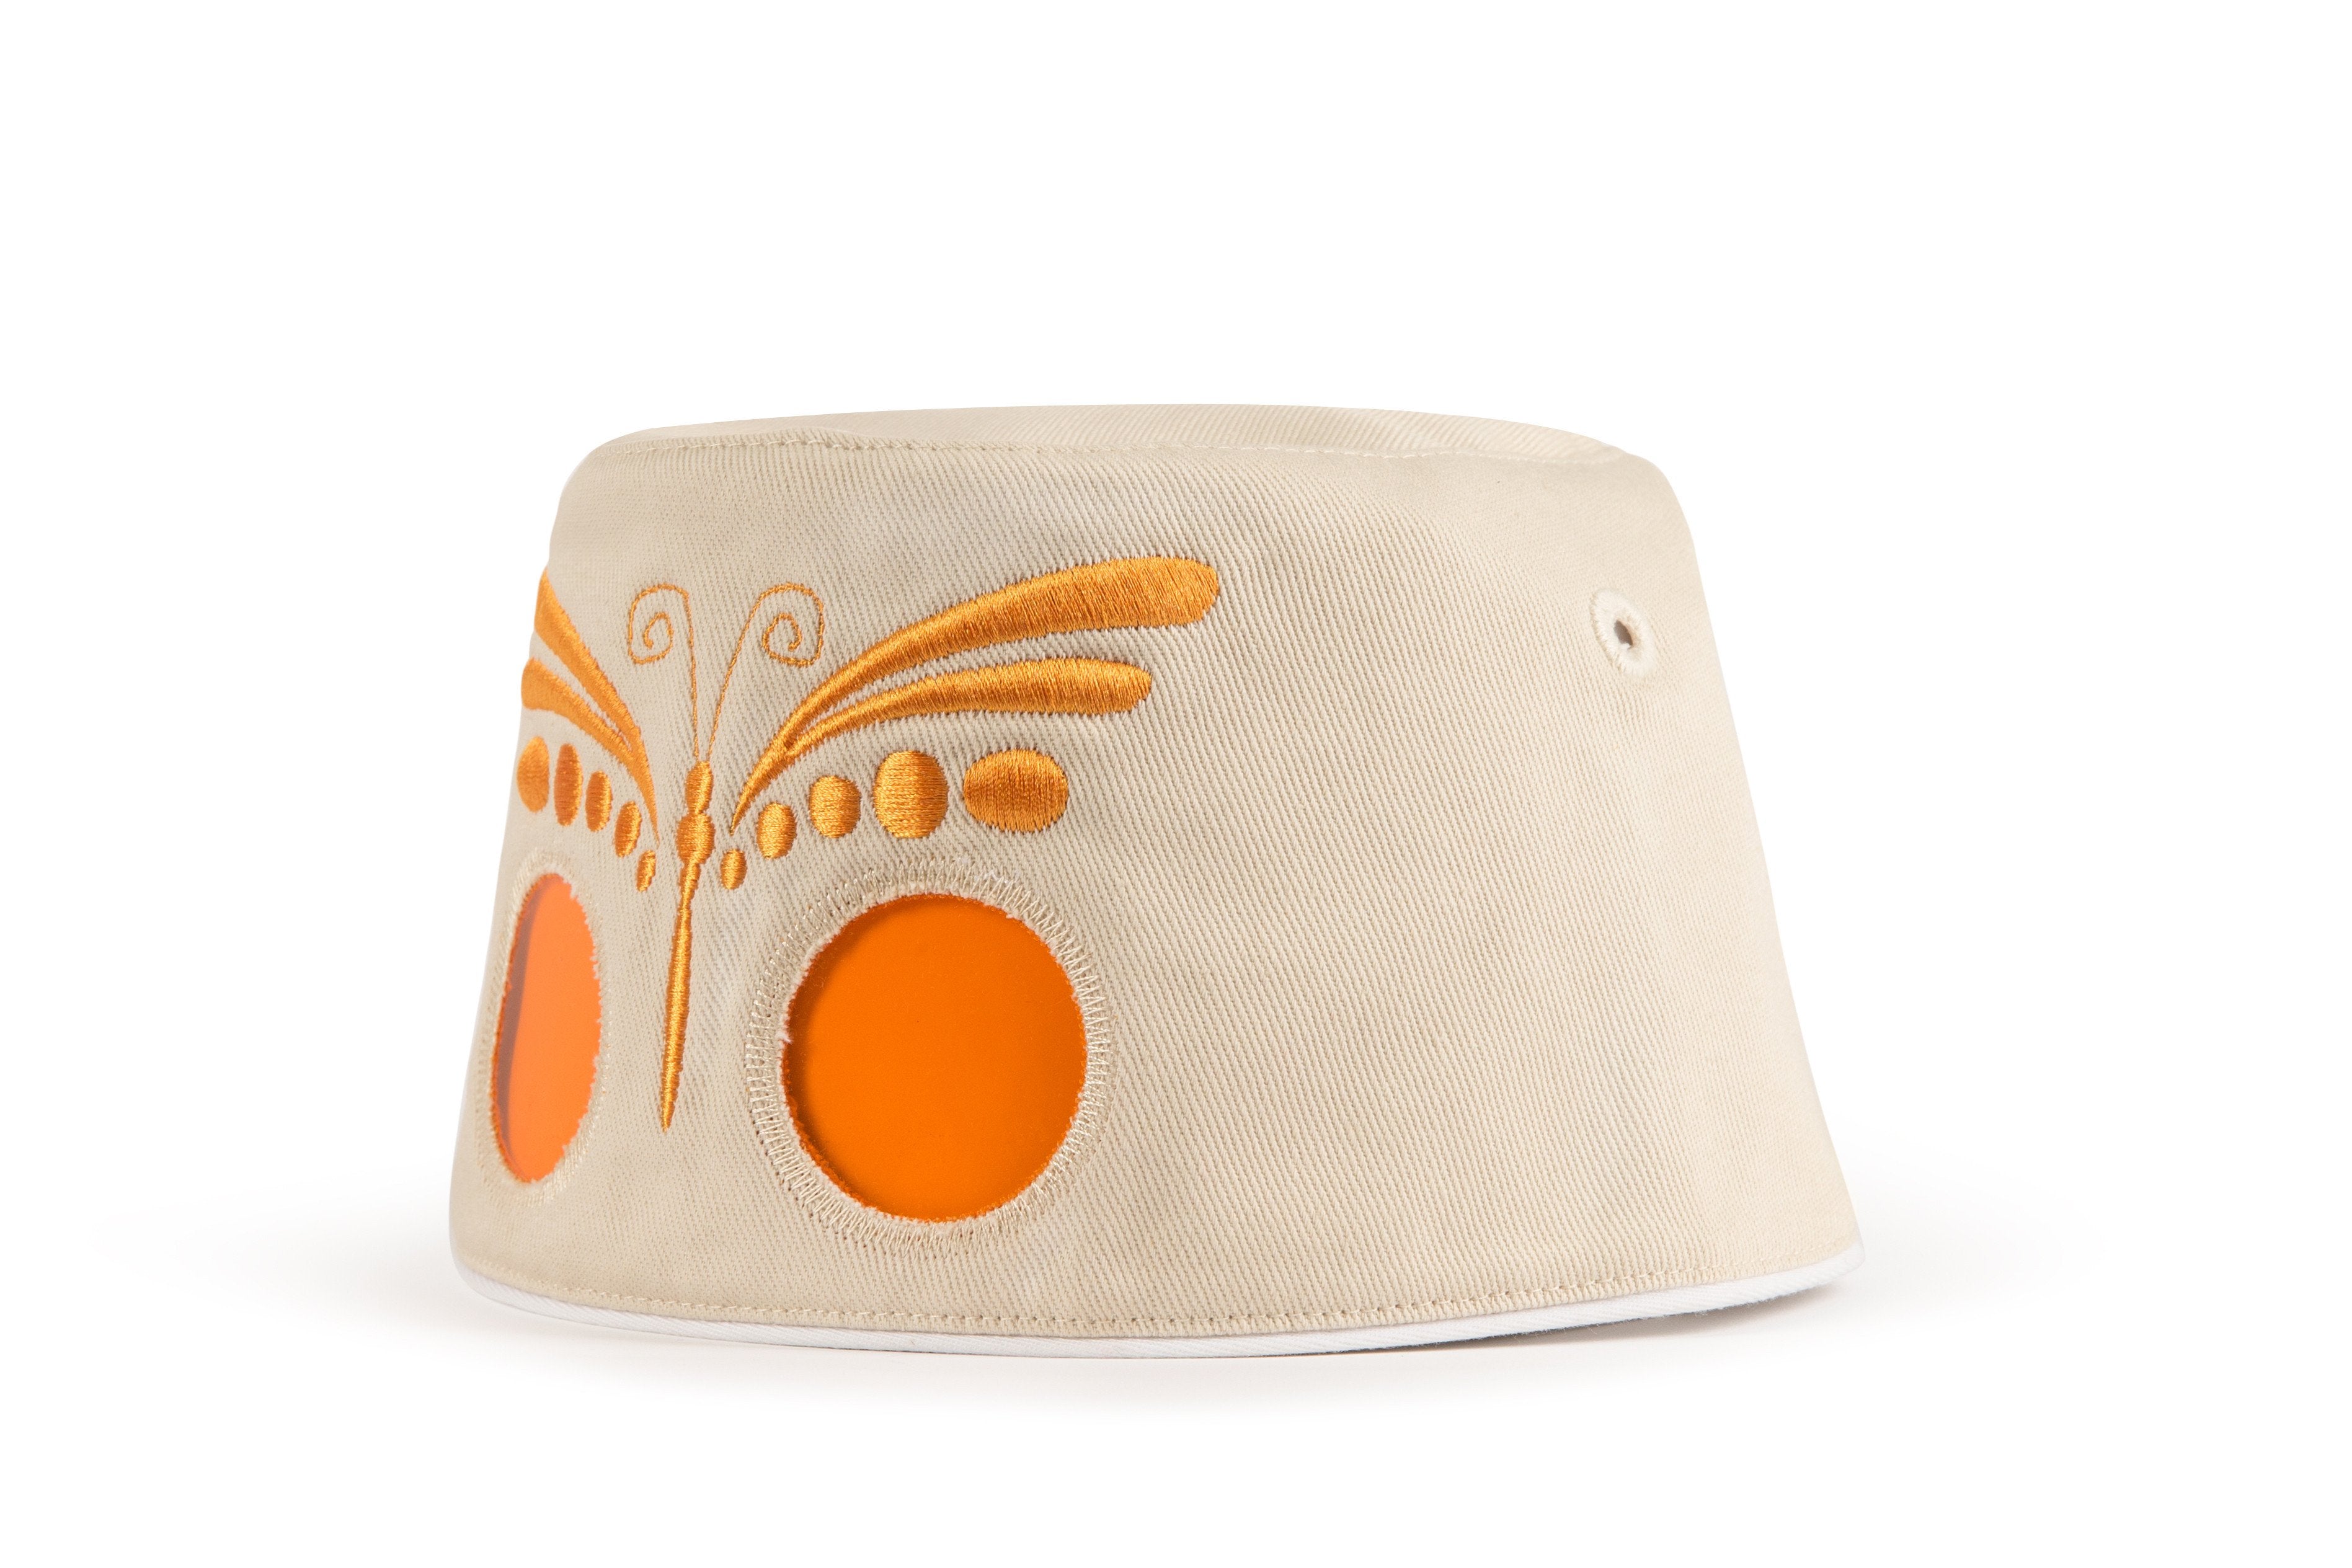 COOEEE Butterfly Sunglasses Hat Khaki with Orange Lenses by Boomerang Baby